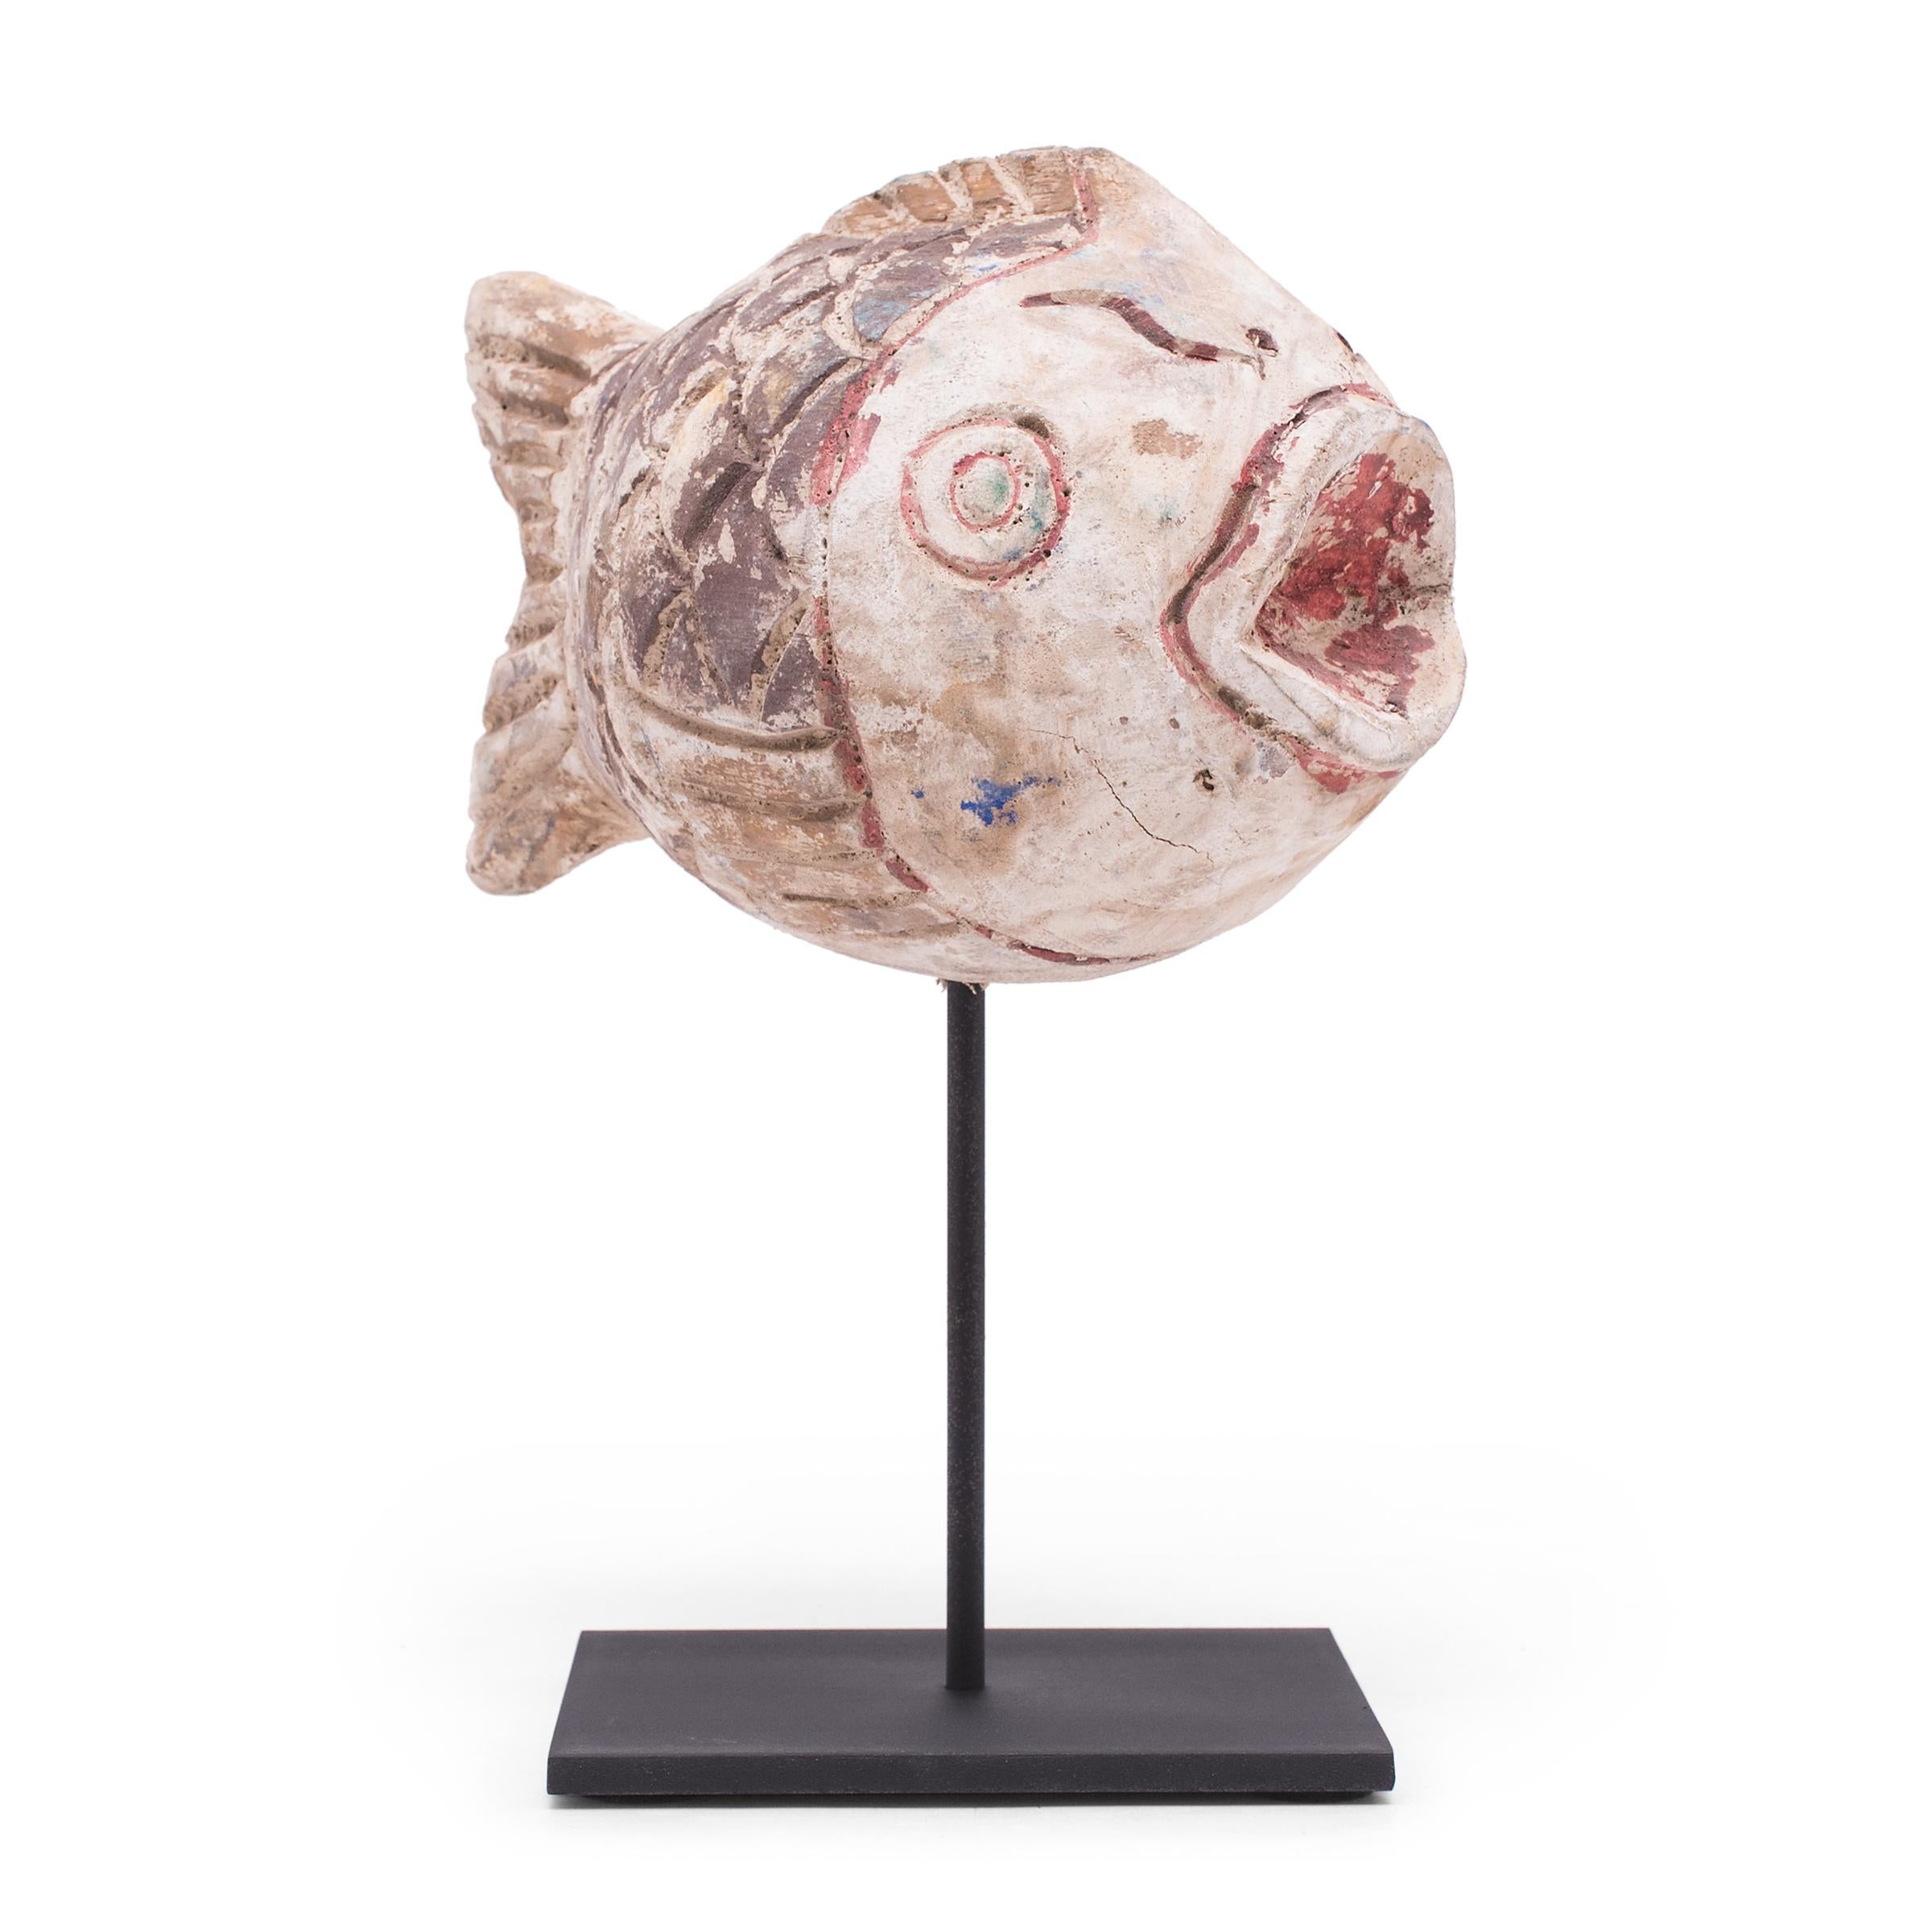 Hand-carved from reclaimed wood, this rustic fish sculpture recreates early 20th-century Chinese Folk Art designs. The fish is painted with a colorful palette of brown, purple, red and yellow and finished with a beautifully worn texture. Common